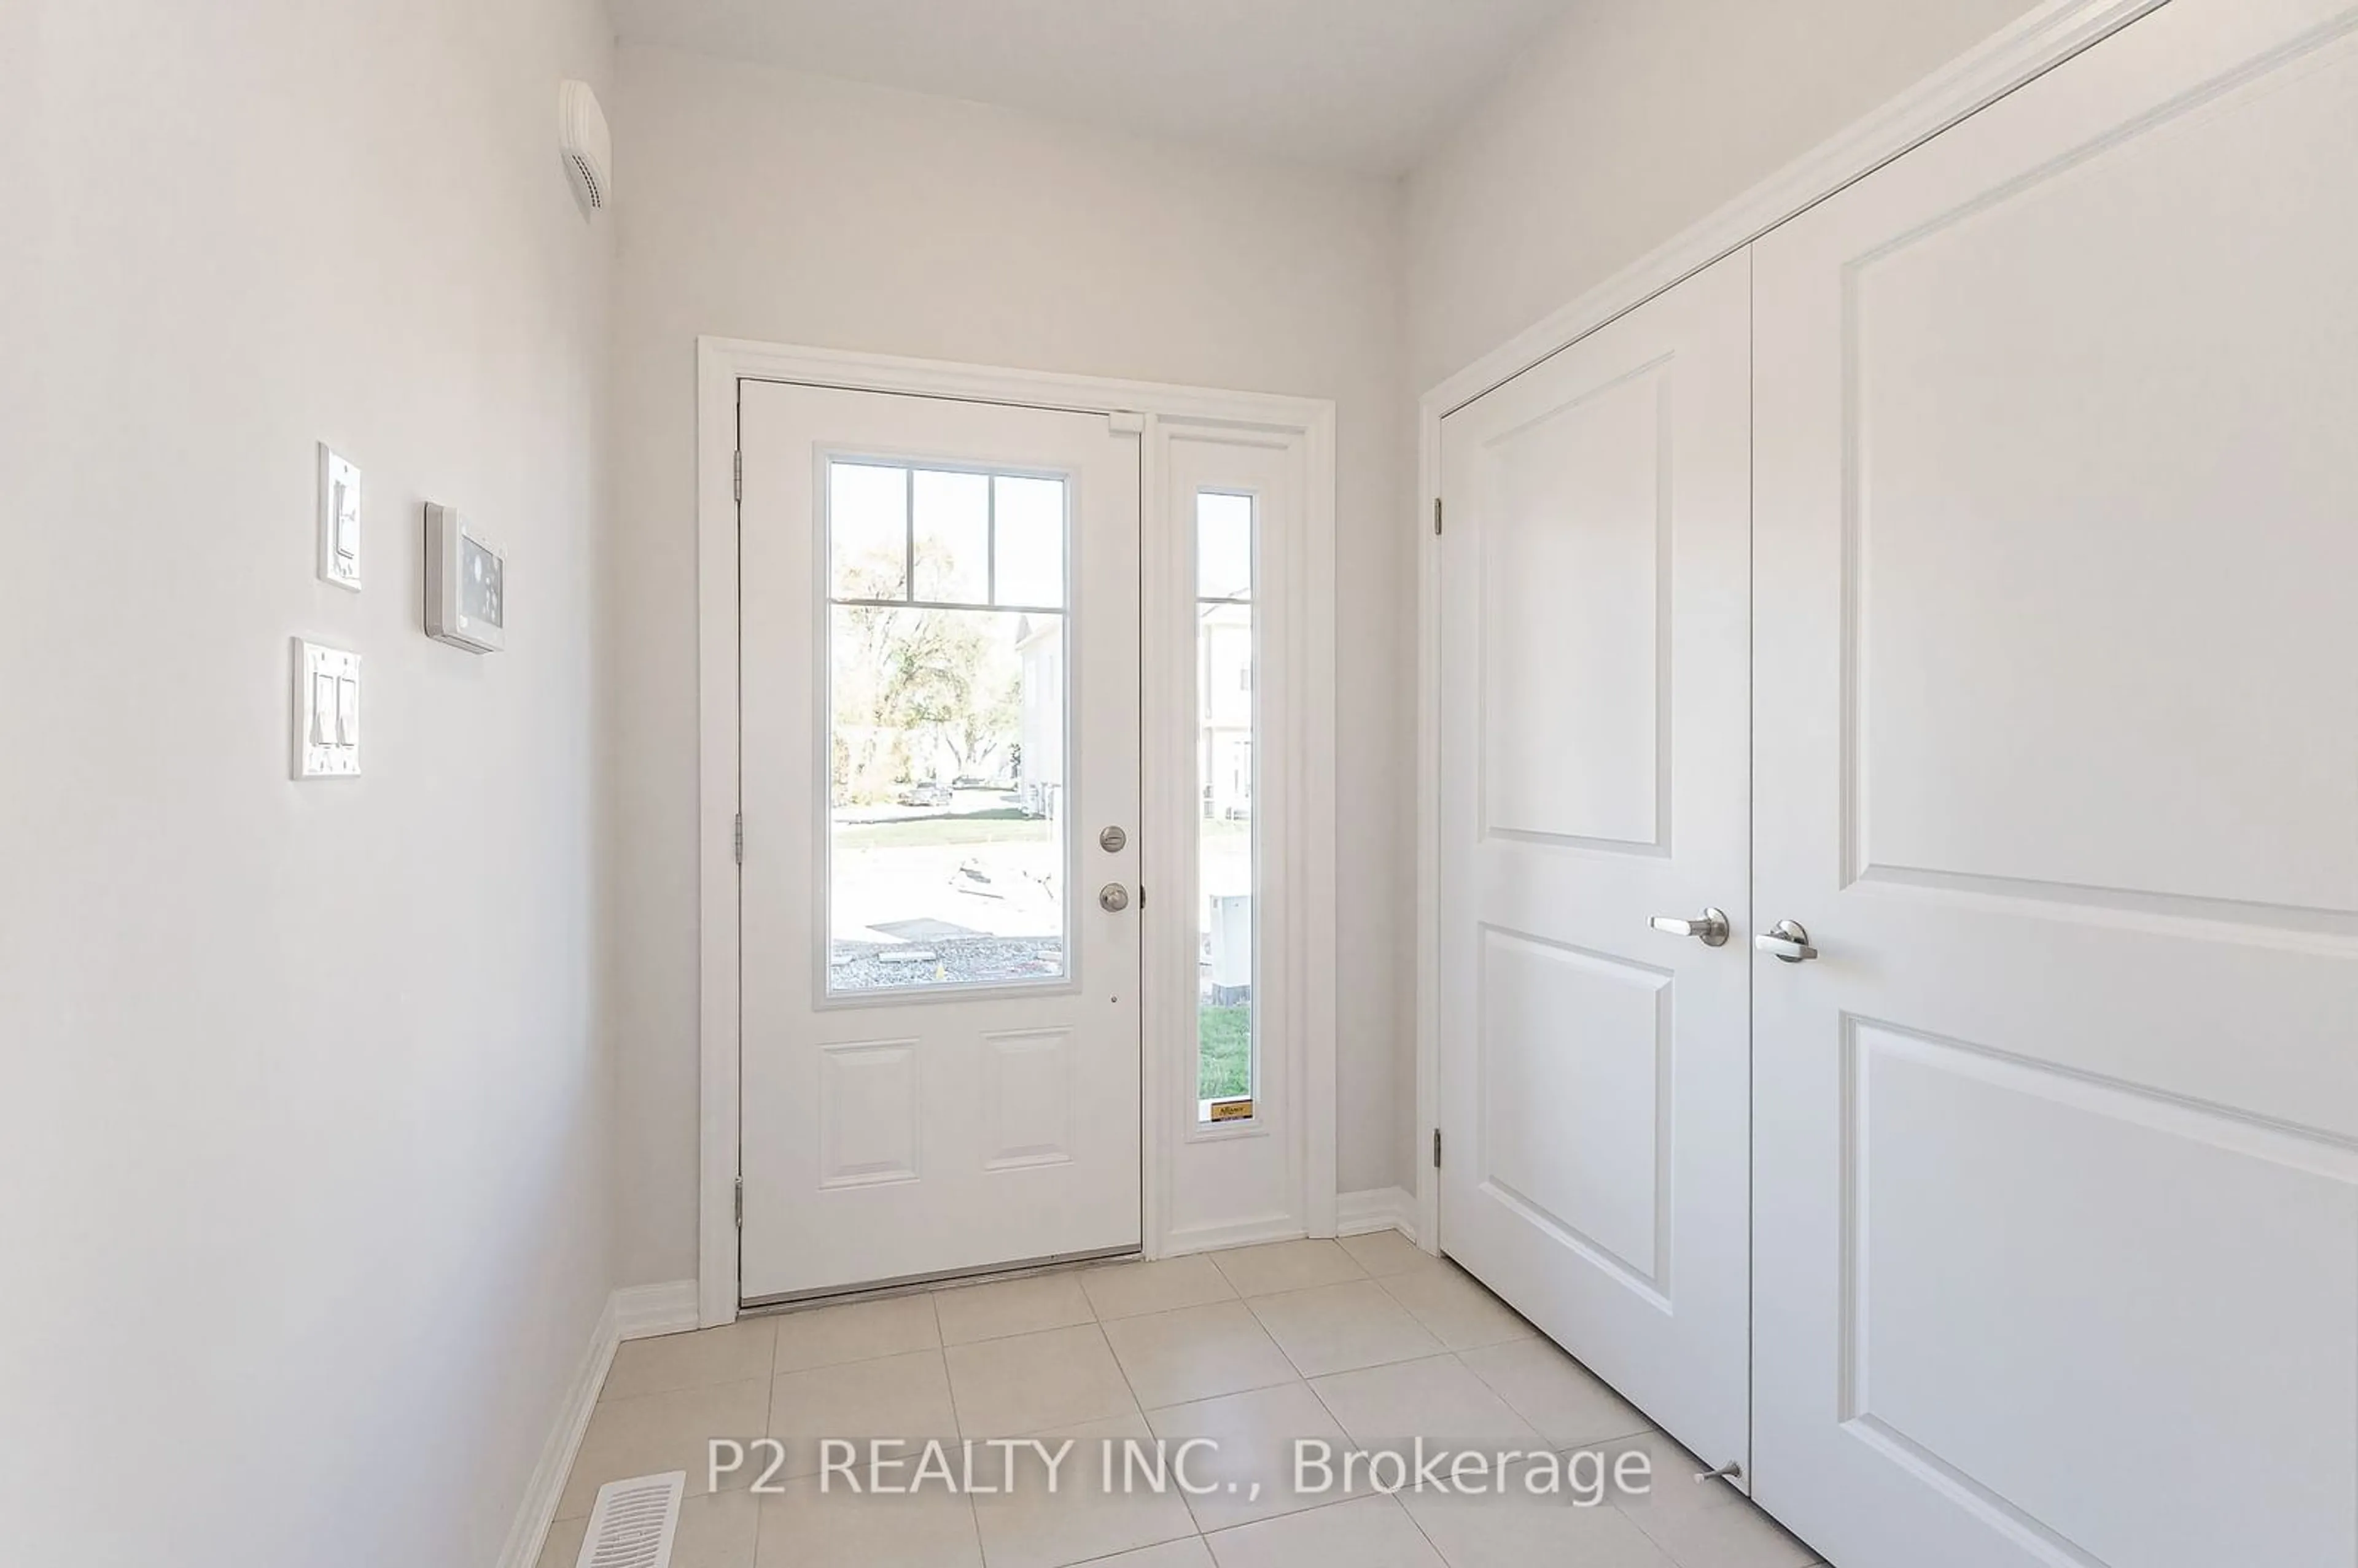 Indoor entryway for 16 Bromley Dr, St. Catharines Ontario L2M 1R1